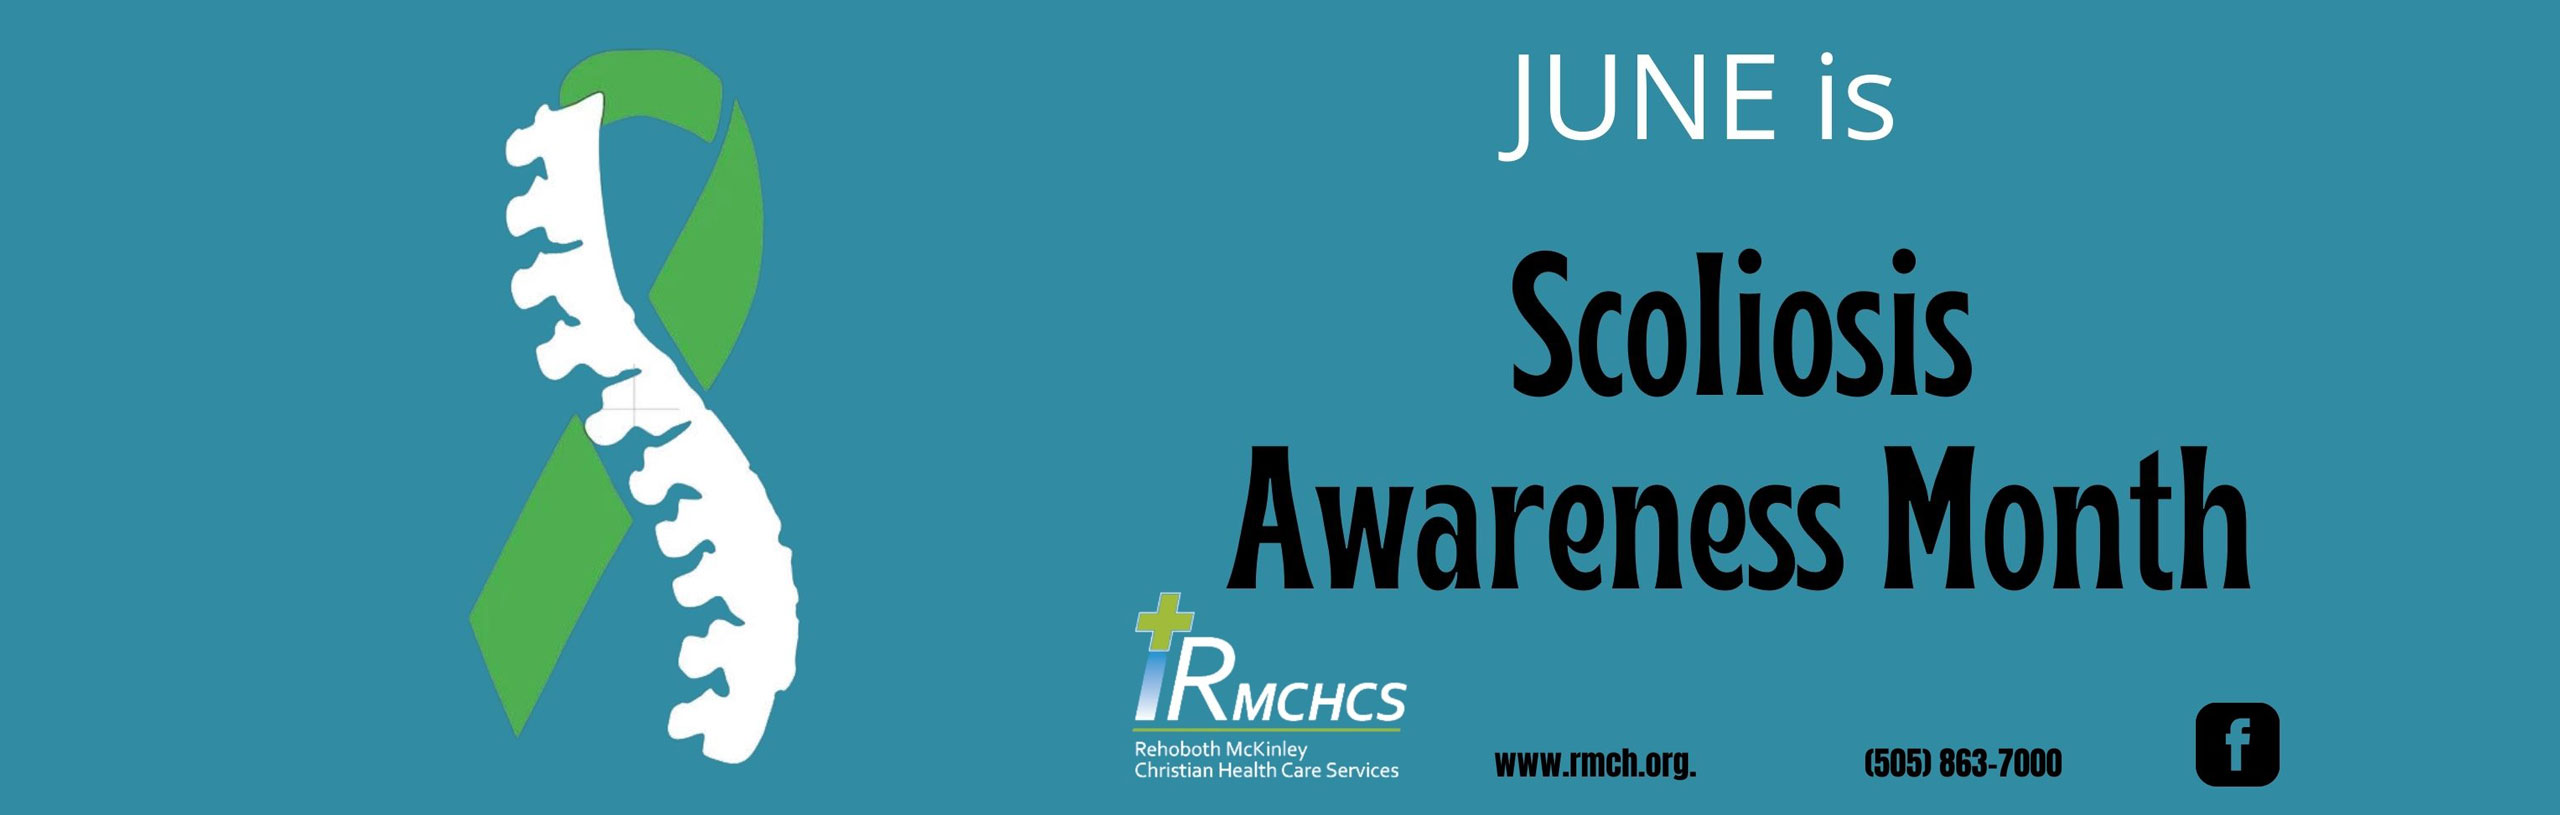 Banner Graphic Picture of an awareness ribbon with one side ribbon and the other is a spine. Banner says:
JUNE is Scoliosis Awareness Moth
RMCHCS
Rehoboth McKinley Christian  Health Care Services
www.rmch.org,
(505) 863-7000
(f) <--- Facebook Logo